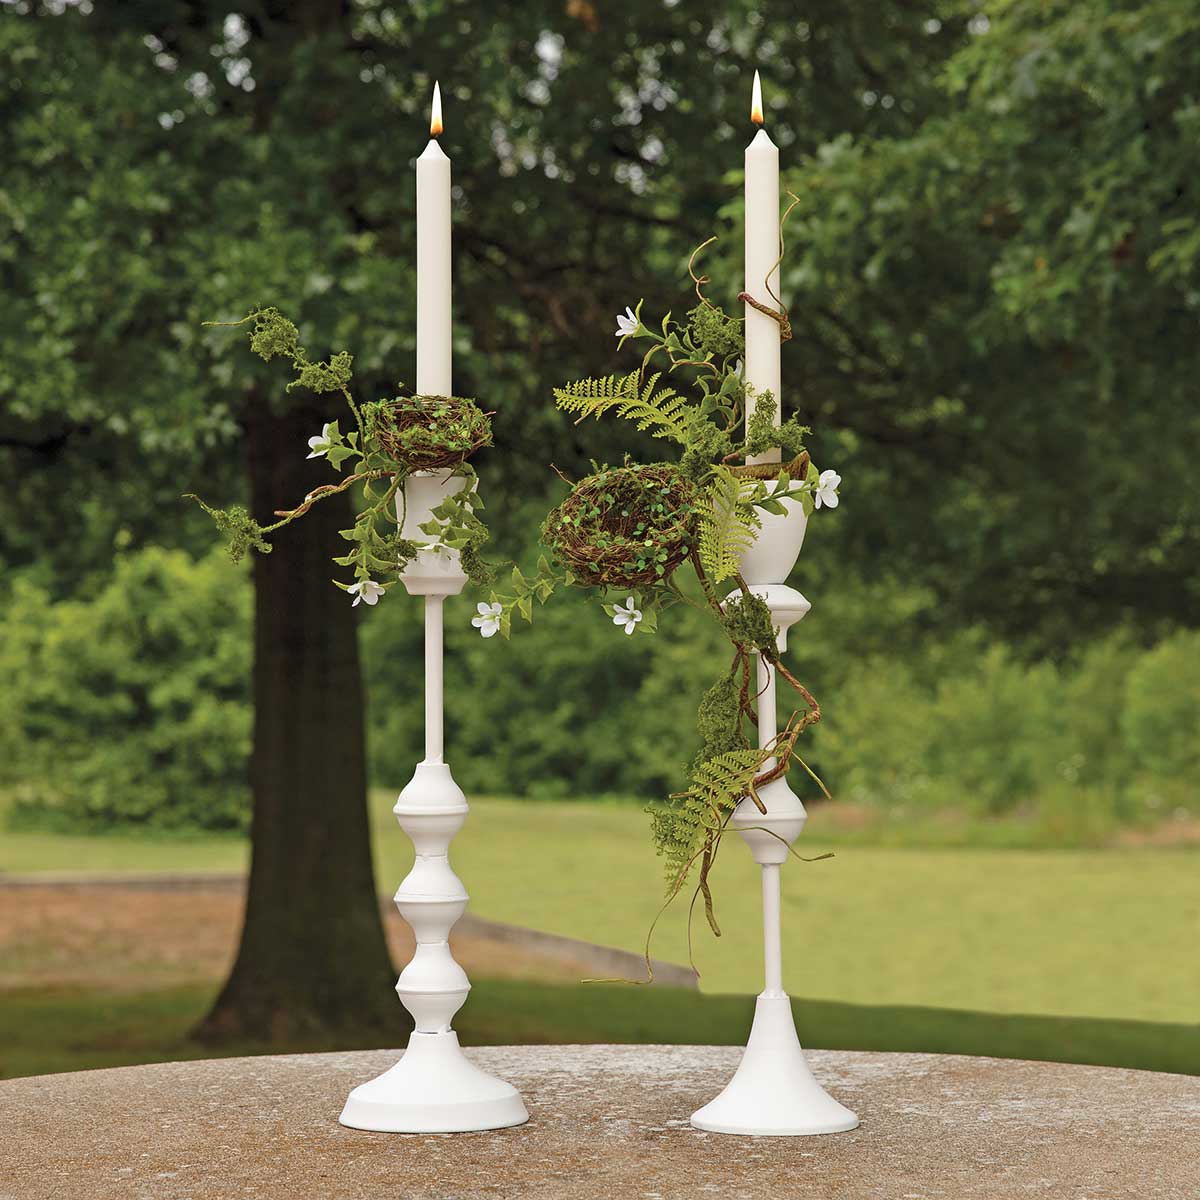 CANDLESTICK/HOLDER CURVES 4.5IN X 15IN MATTE WHITE METAL